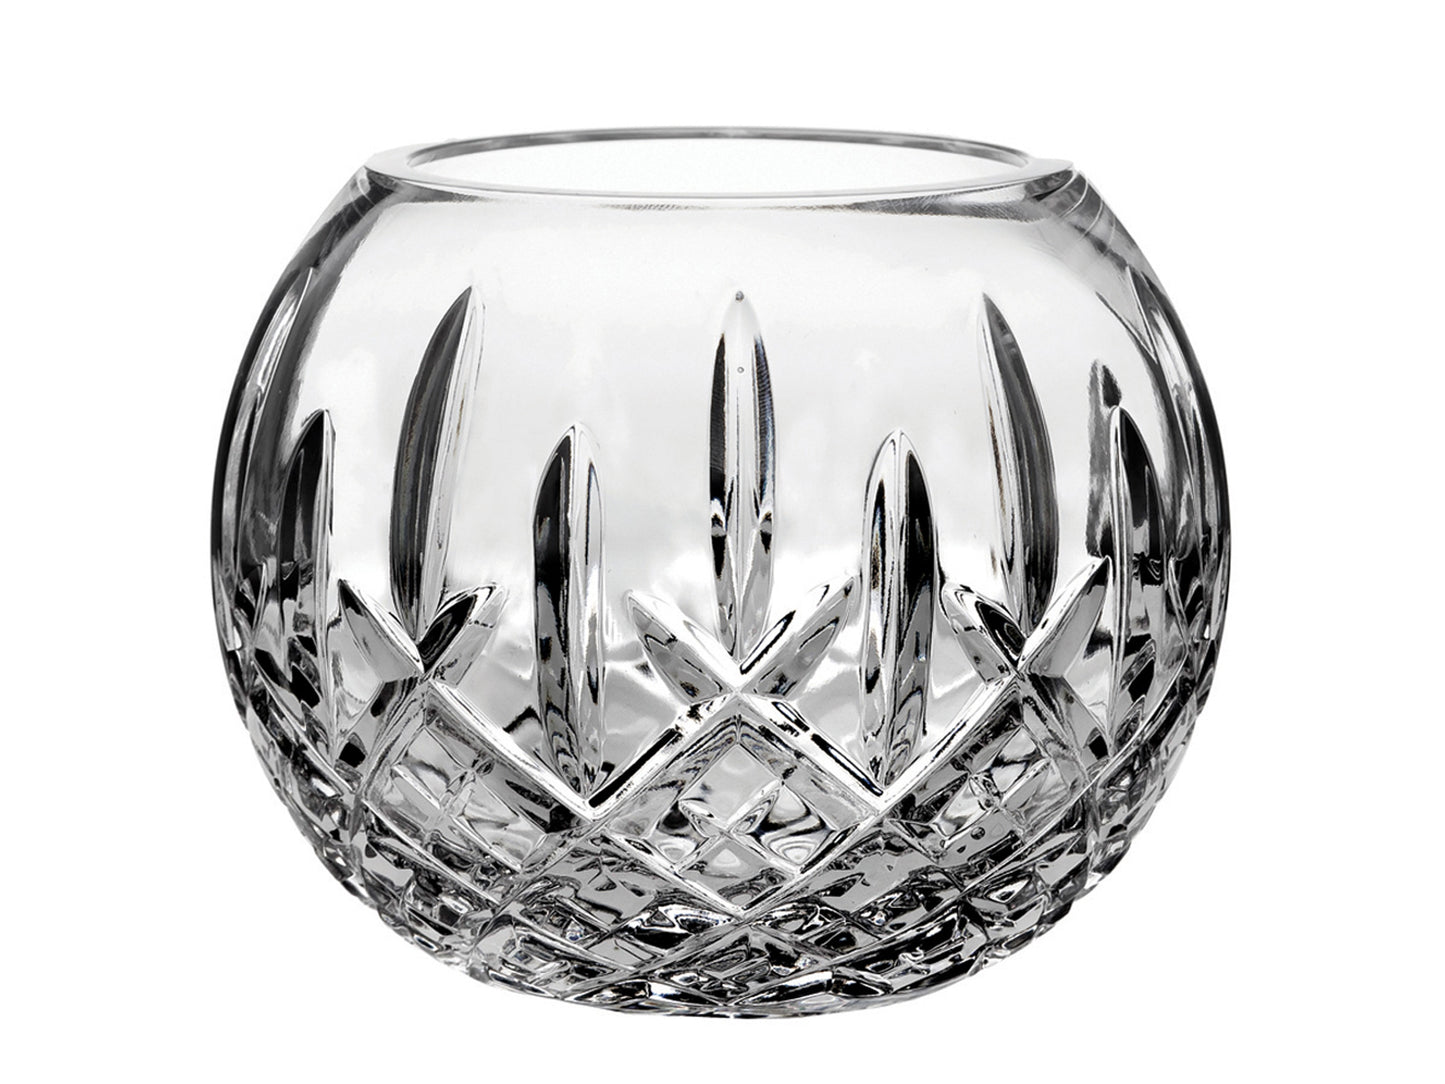 A round crystal vase with a cut pattern on the outside, featuring a bed of diamonds and single dashes going up towards the smooth rim